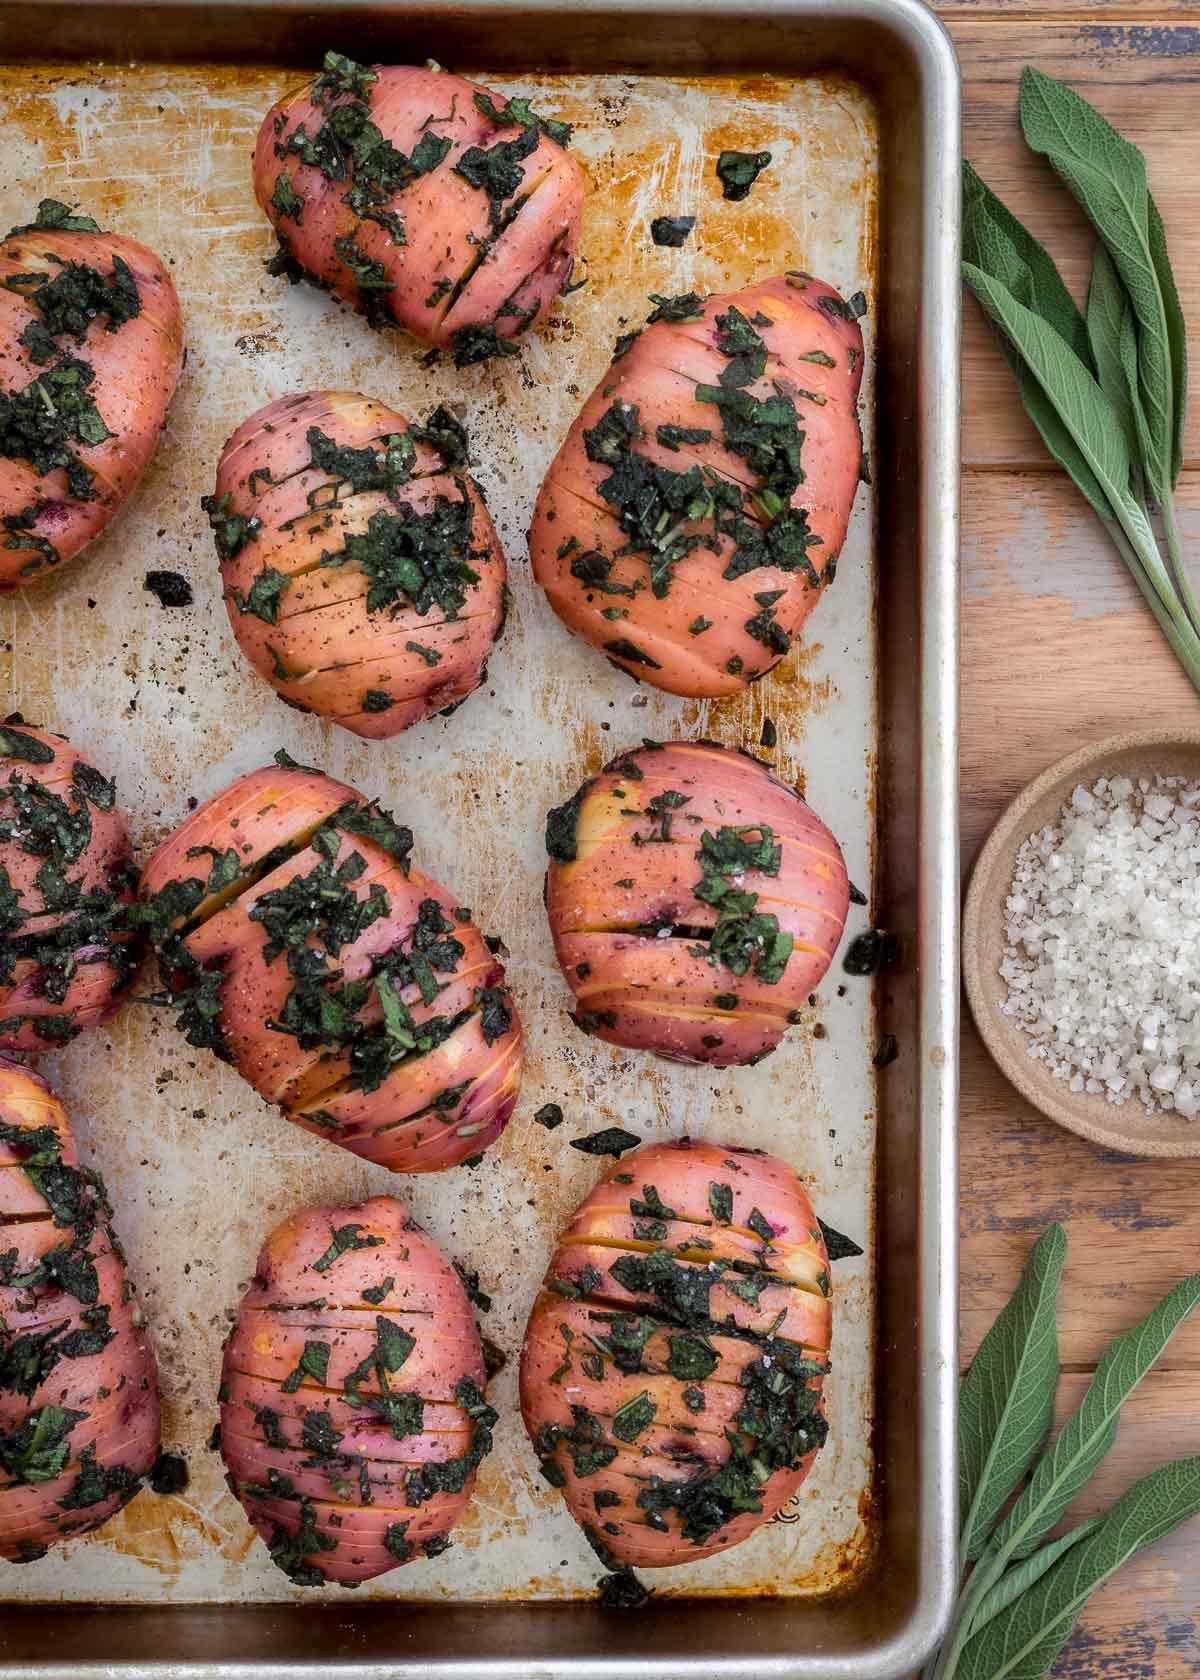 Sage-filled hasselback red potatoes on a silver baking sheet with sage leaves nearby.